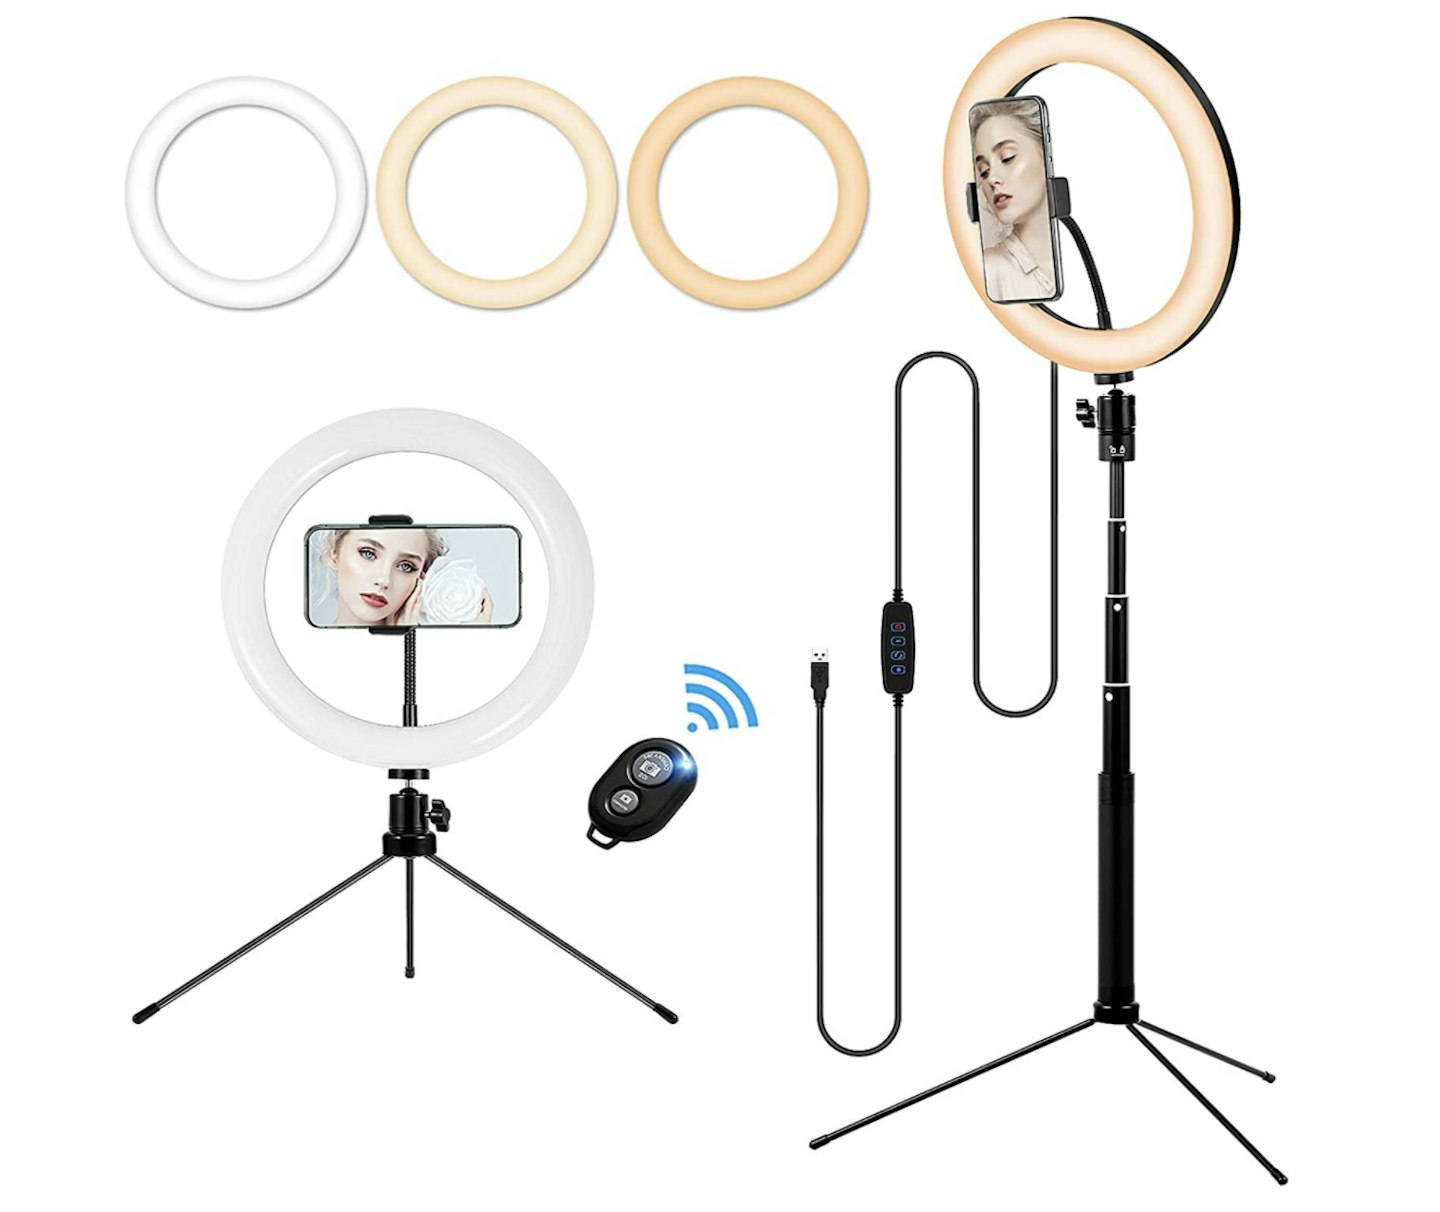 GerTing 10-inch Makeup Ring Light with Tripod Stand and Phone Holder